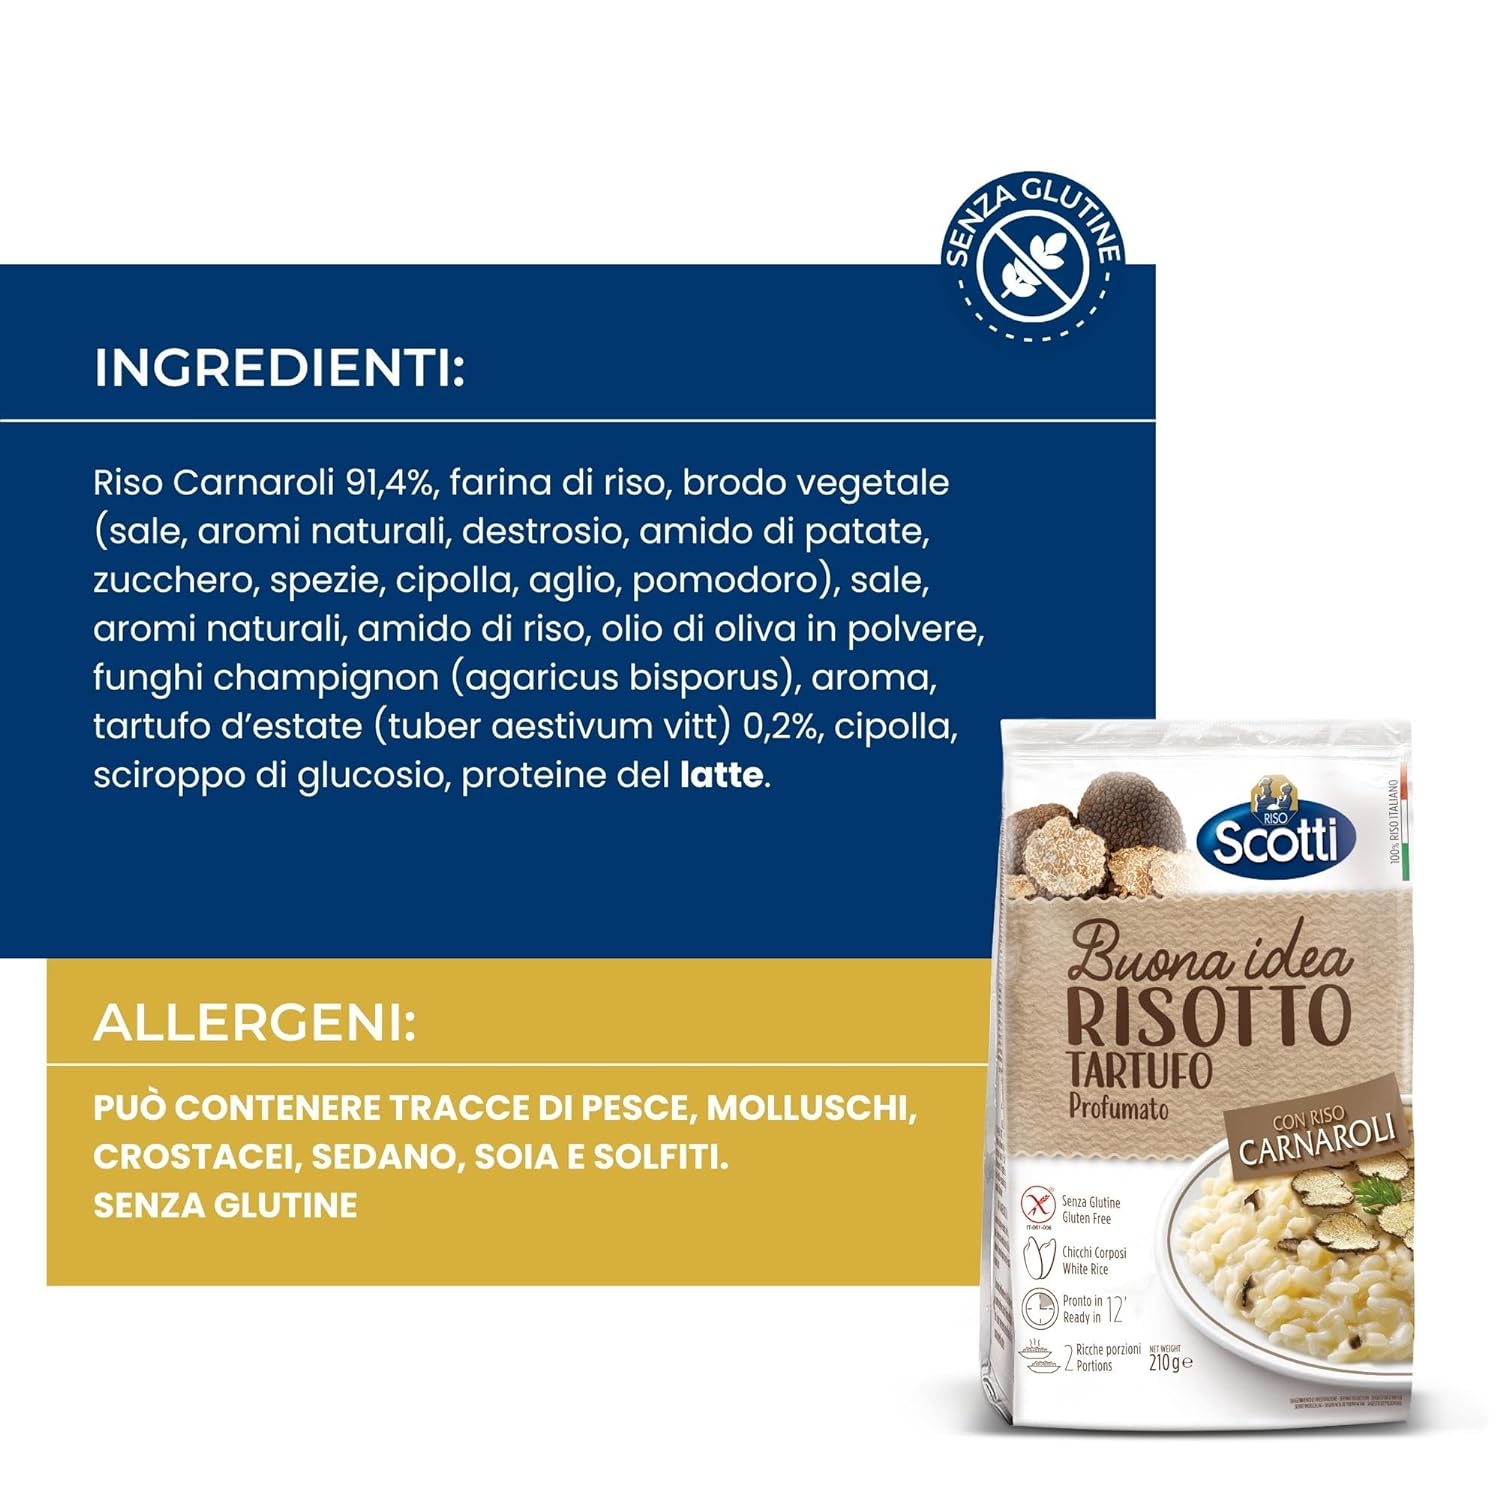 Truffle Seasoned Risotto, Riso Scotti, Carnarolli Rice, Ready Meal, Easy to Cook, Italian Seasoned Risotto, Easy Dinner Side Dish, Just Add Water and Heat, 7.4 oz, 2-3 servings : Grocery & Gourmet Food